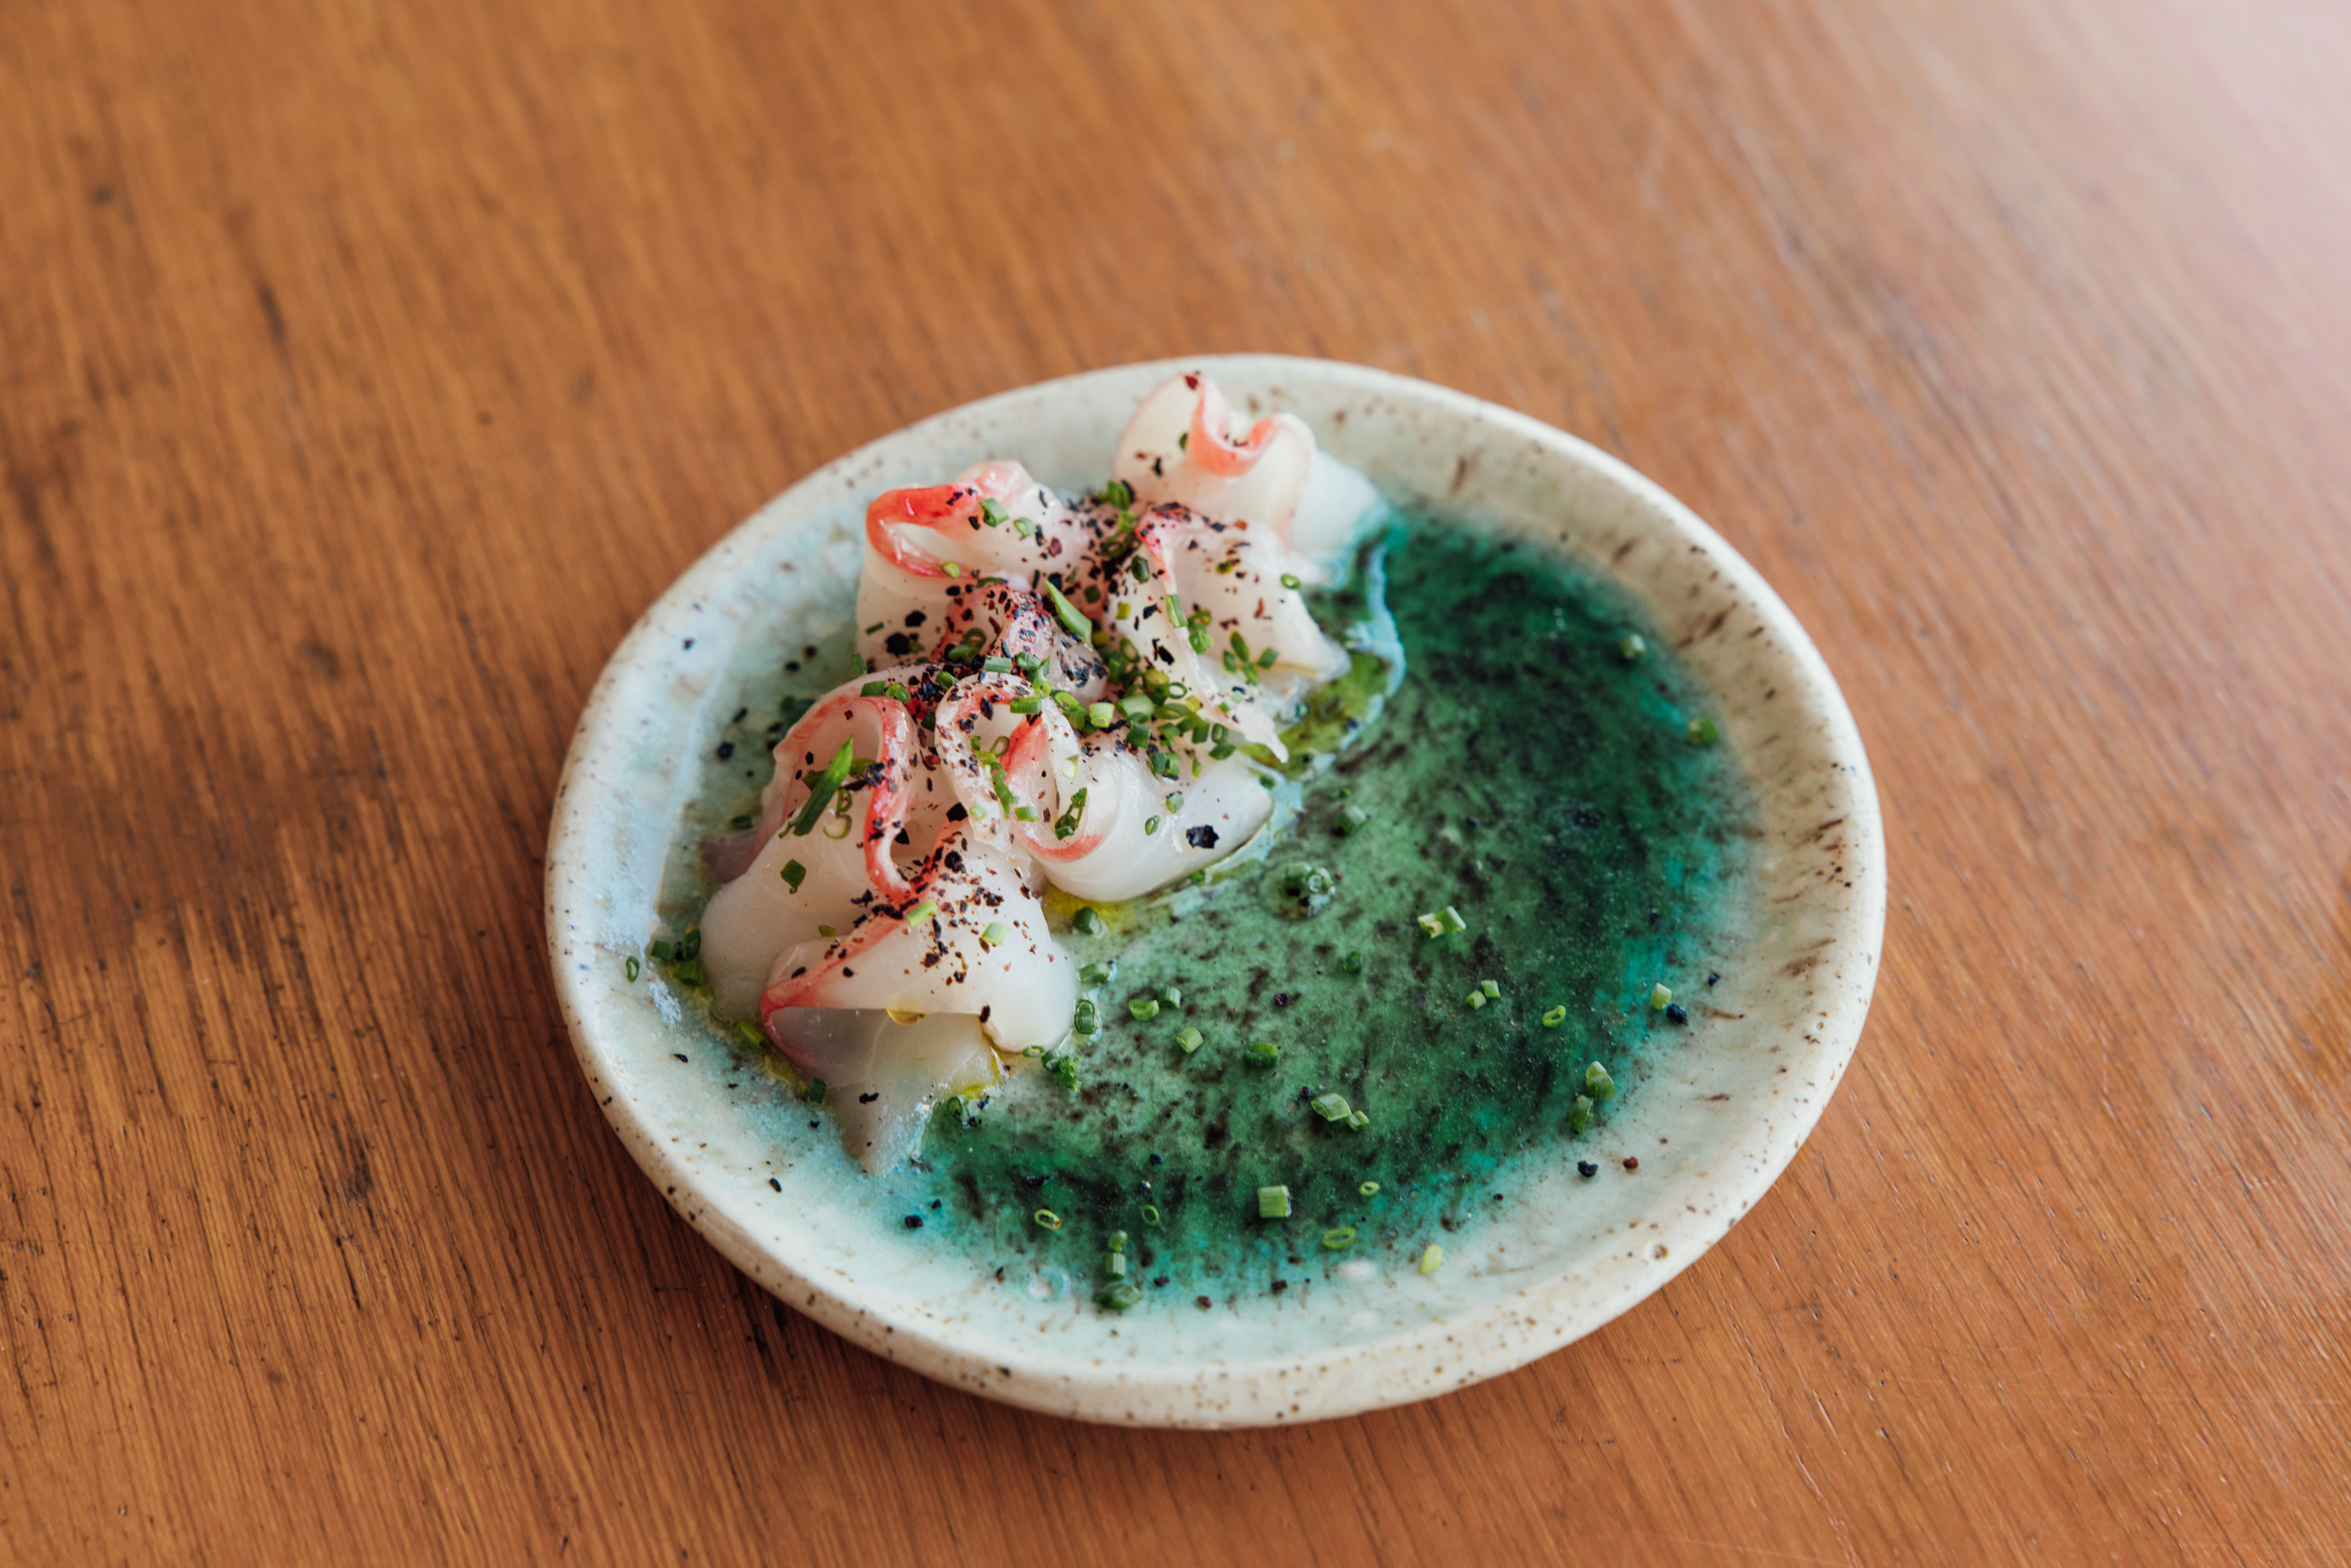 A plate of rockfish in vibrant green sauce and garnished with chives and chile.